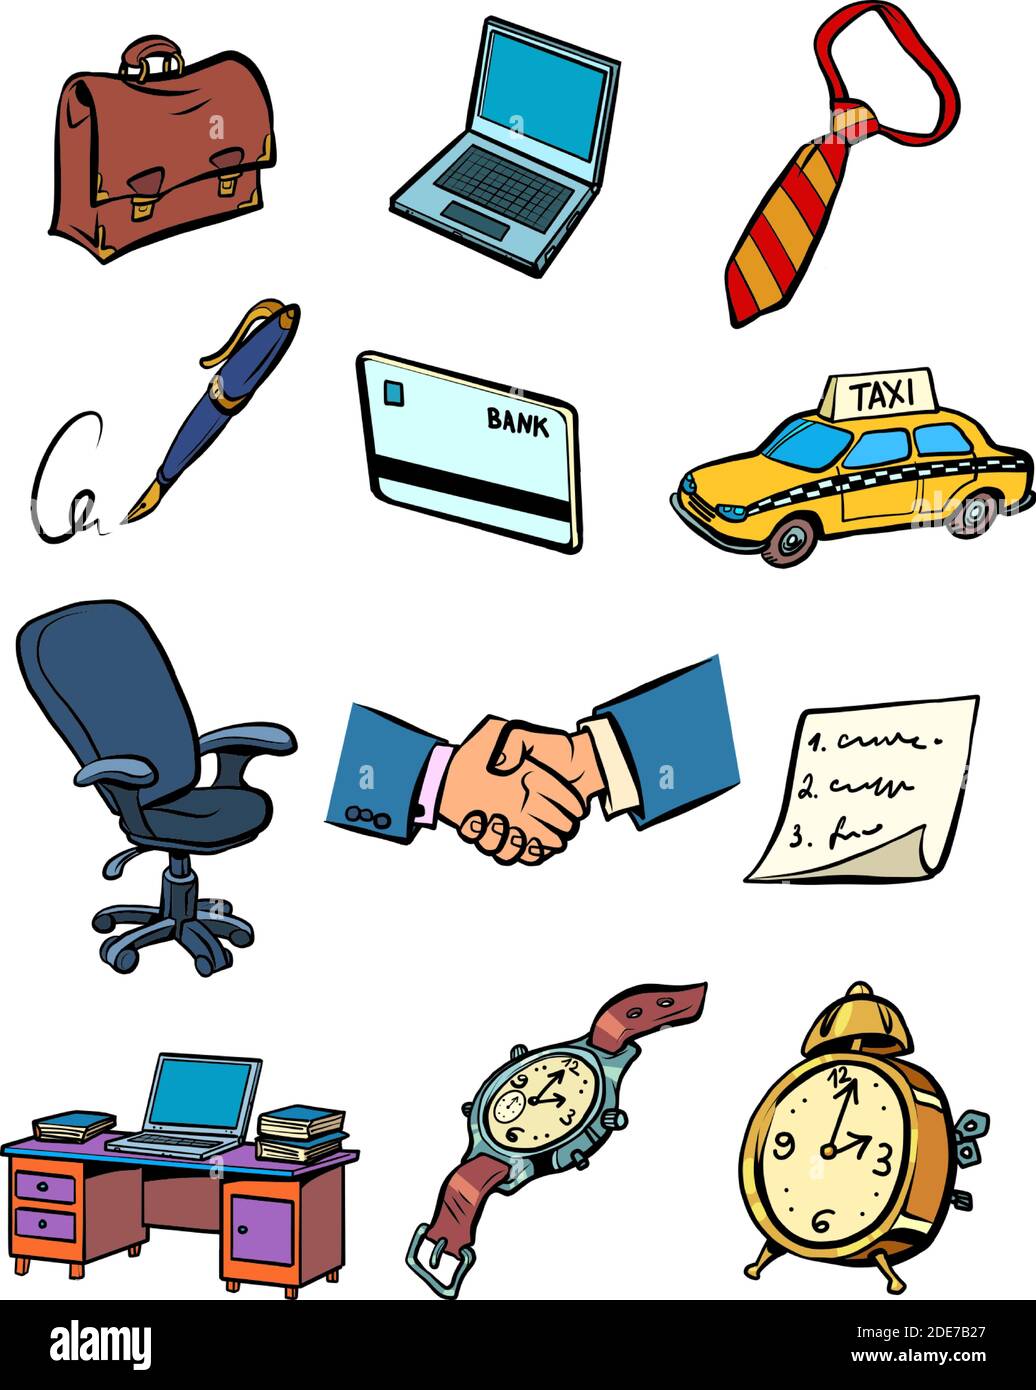 Business accessories things of a businessman collection set icons symbols Stock Vector